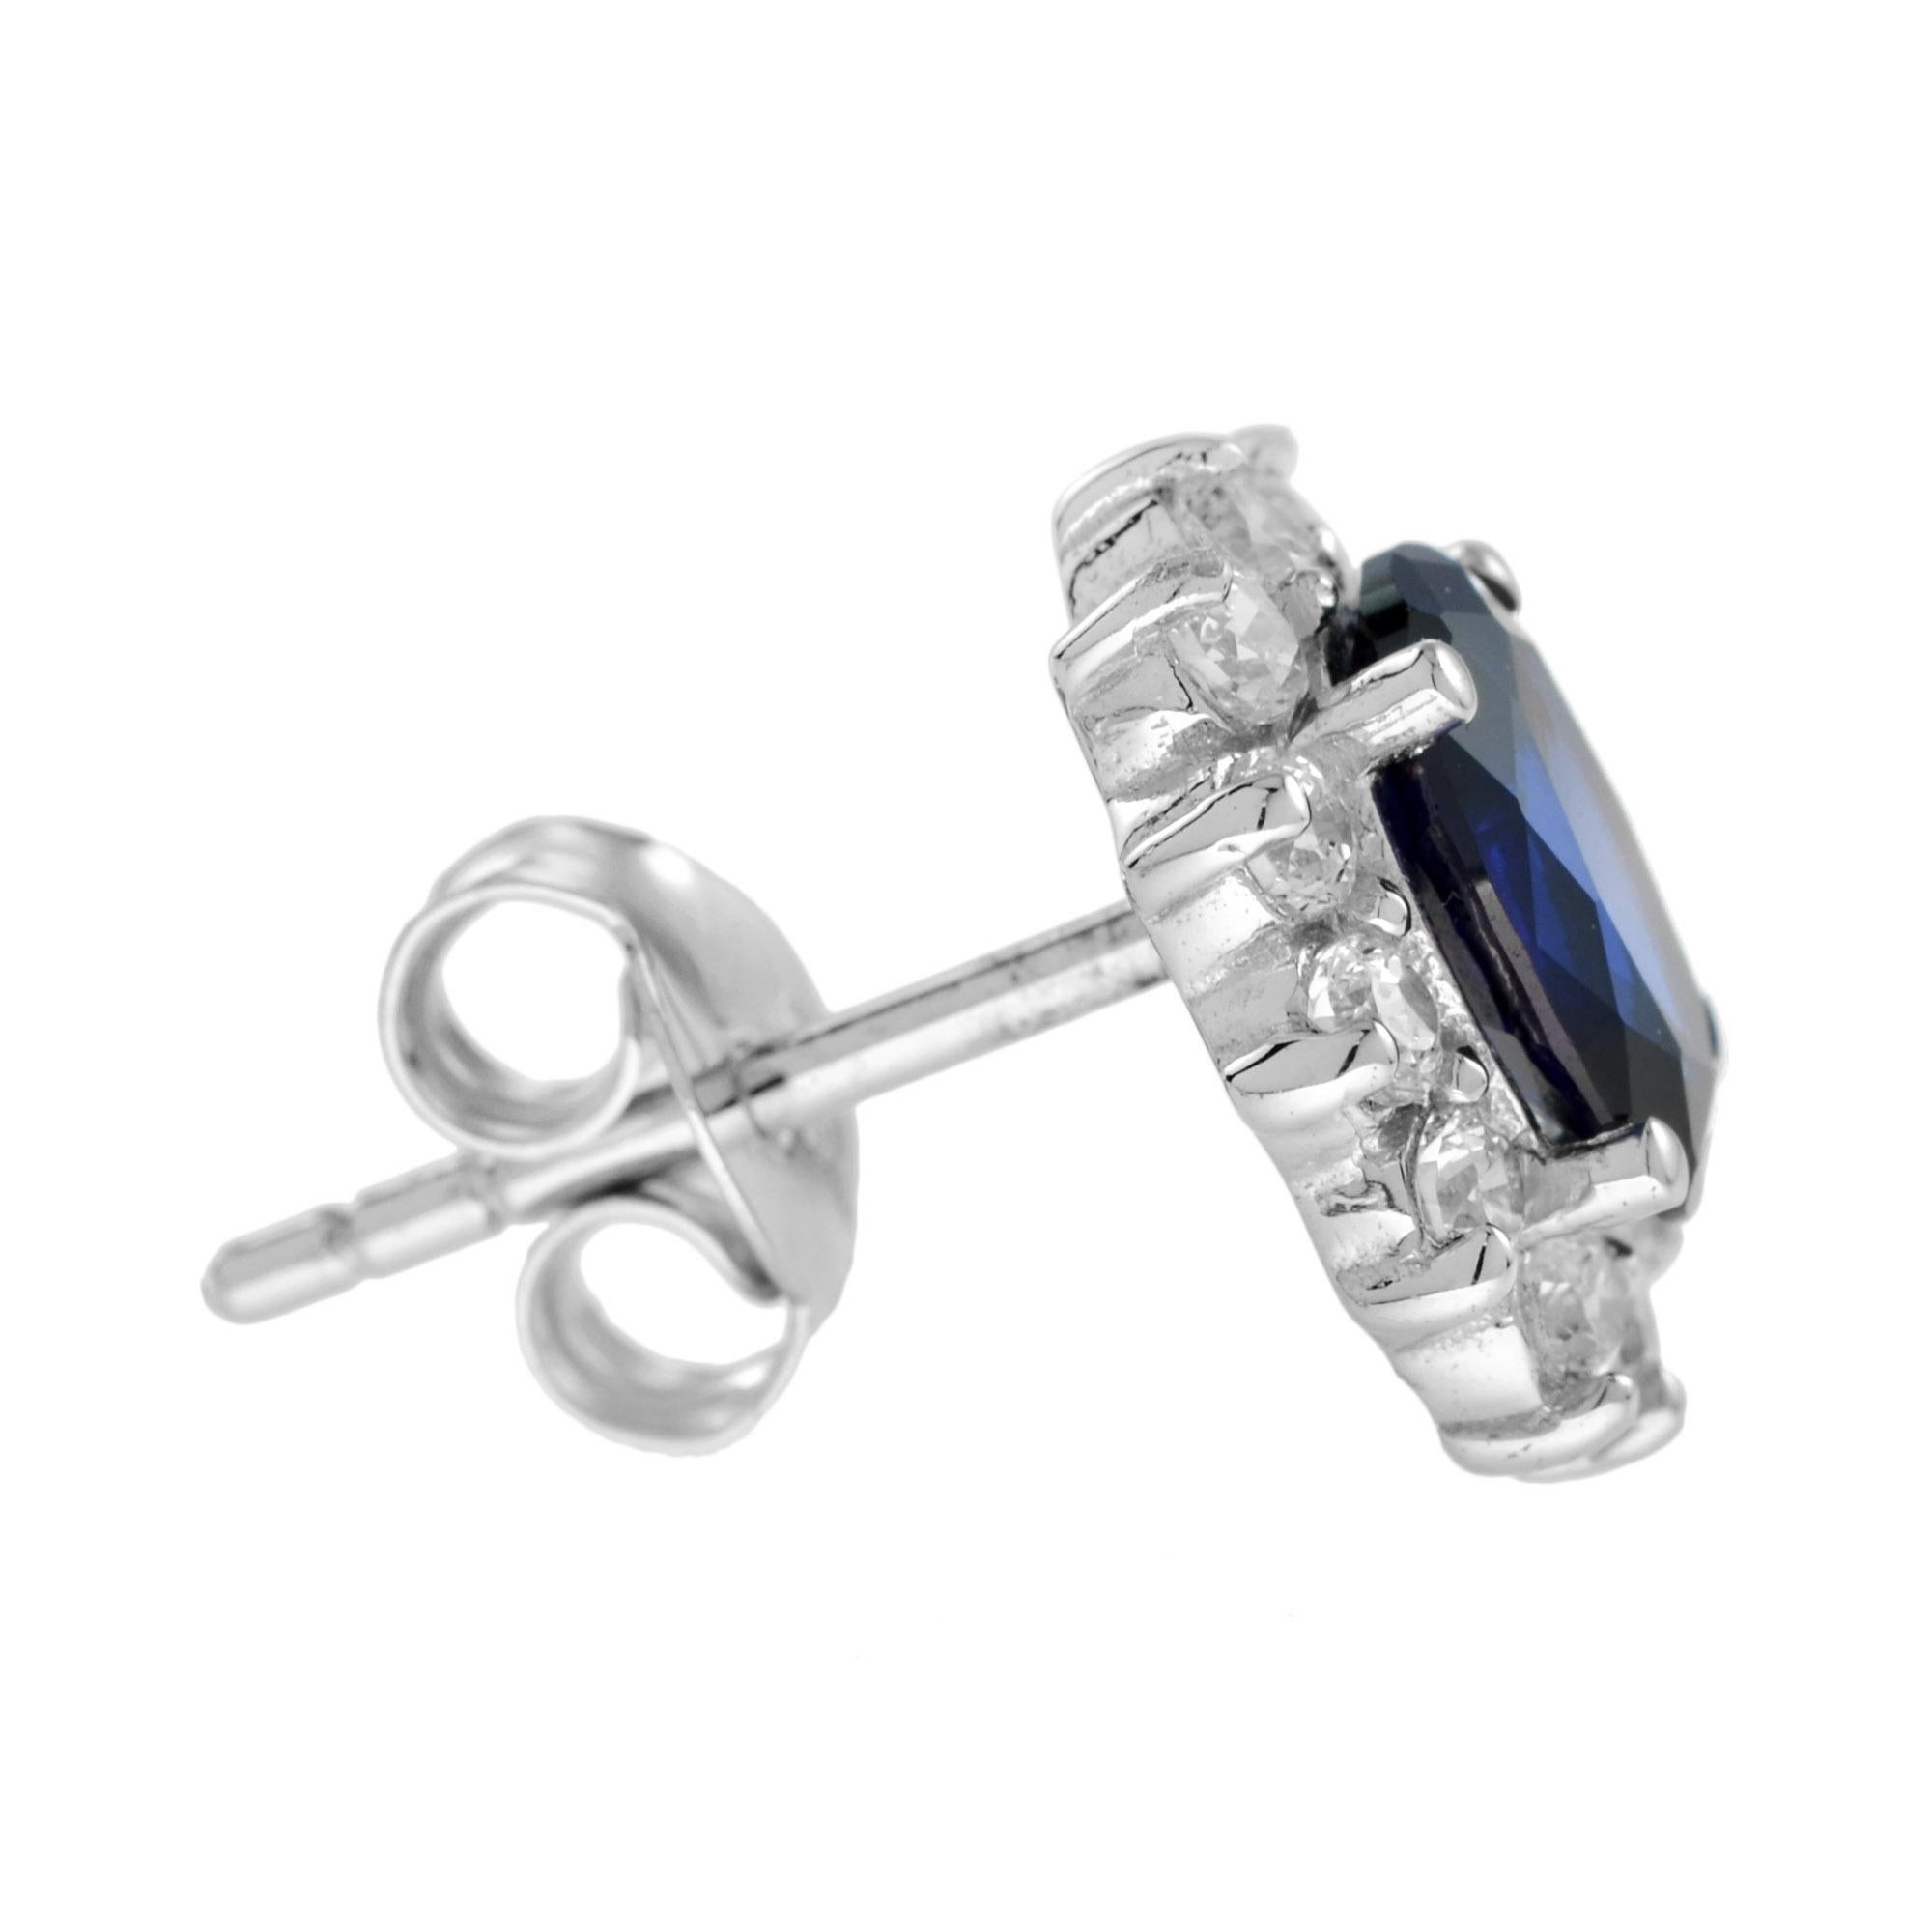 A pair of oval sapphire and diamond cluster earrings, each earring comprising an oval sapphire surrounded by twelve round brilliant cut diamonds, all claw set to 18K white gold. 

Information
Style: Vintage
Metal: 18K White Gold
Width: 11